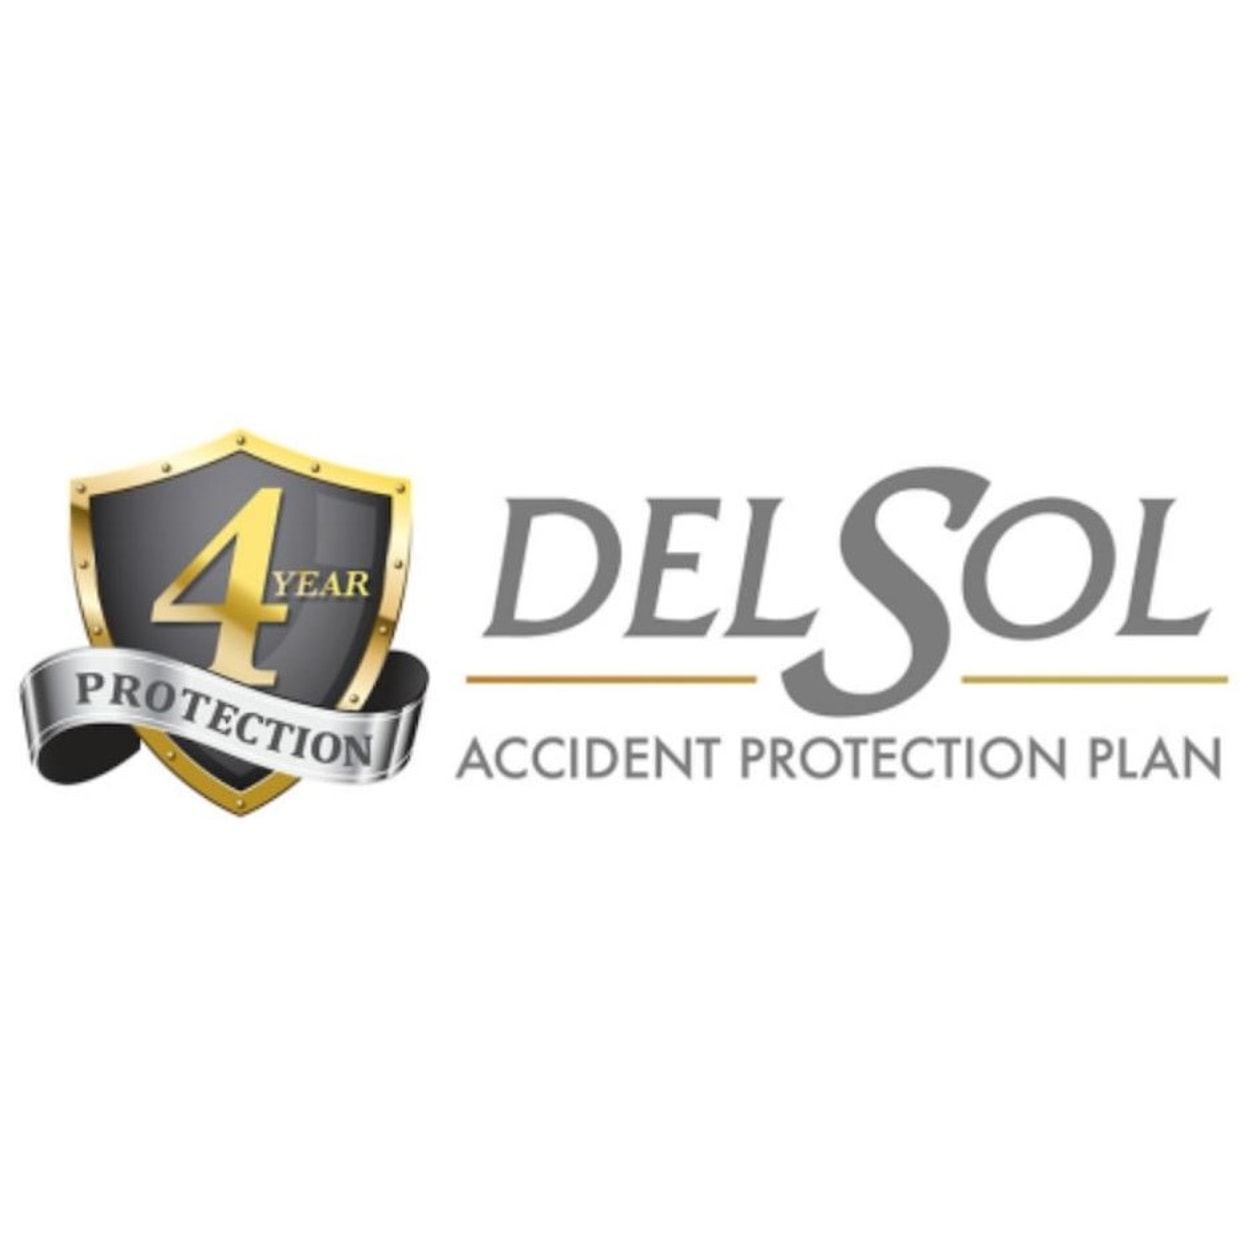 DS Del Sol Protection Plan 4YR Protection Plan - $801 to $1,000